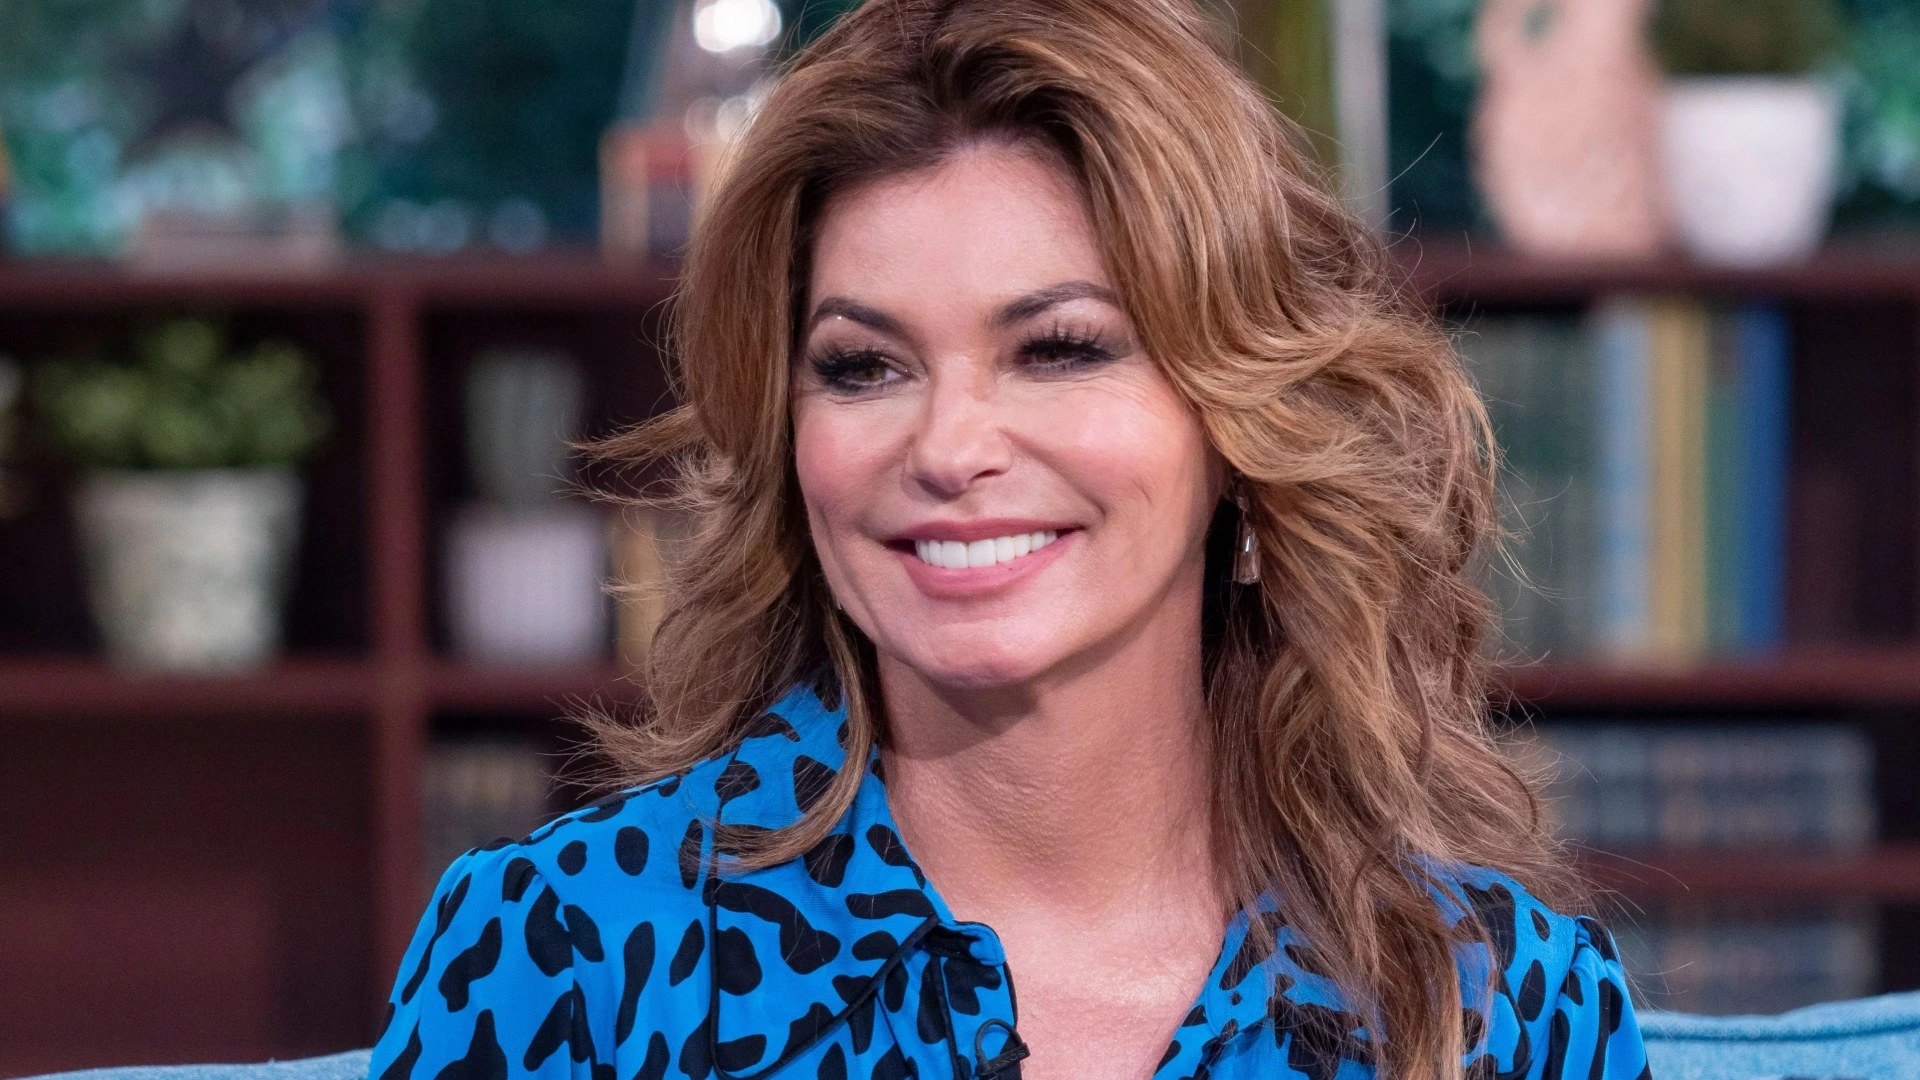 Shania Twain on what gives her comfort if she isn’t ‘able to sing again’ in the future